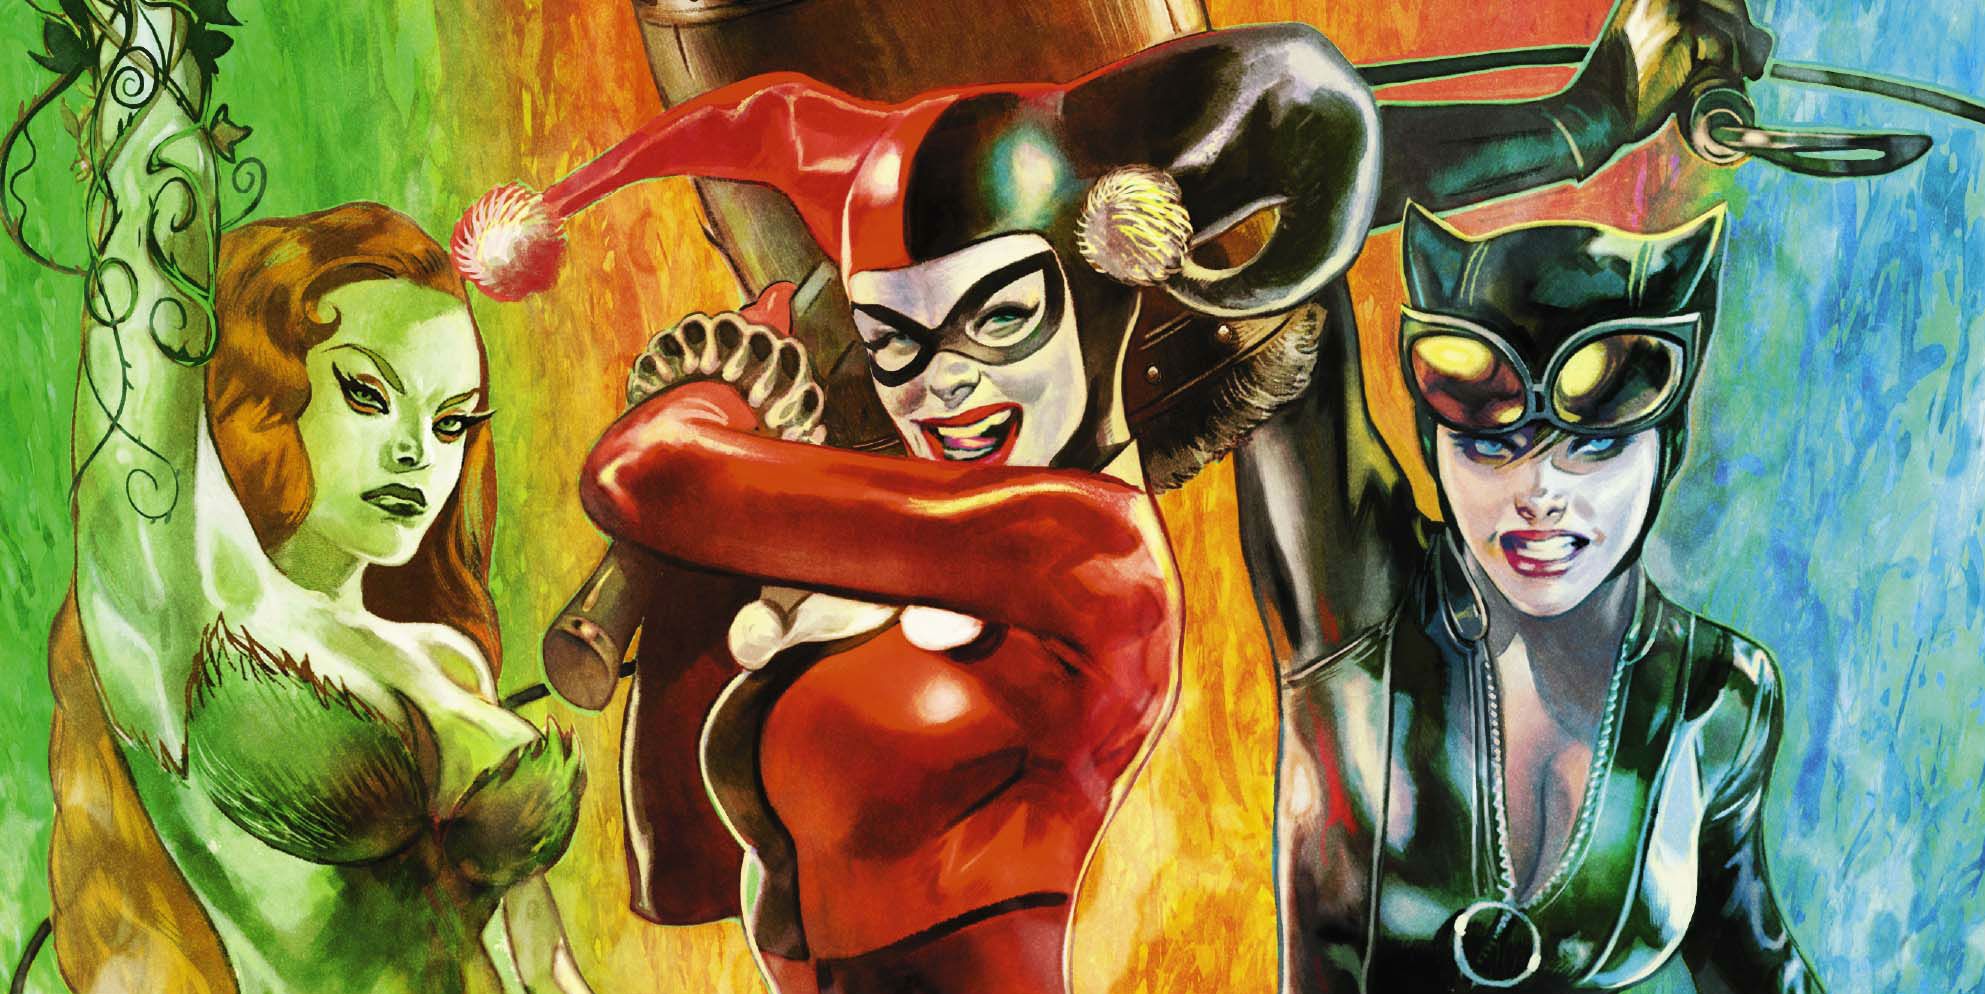 Gotham City Sirens wallpapers, Comics, HQ Gotham City Sirens pictures.